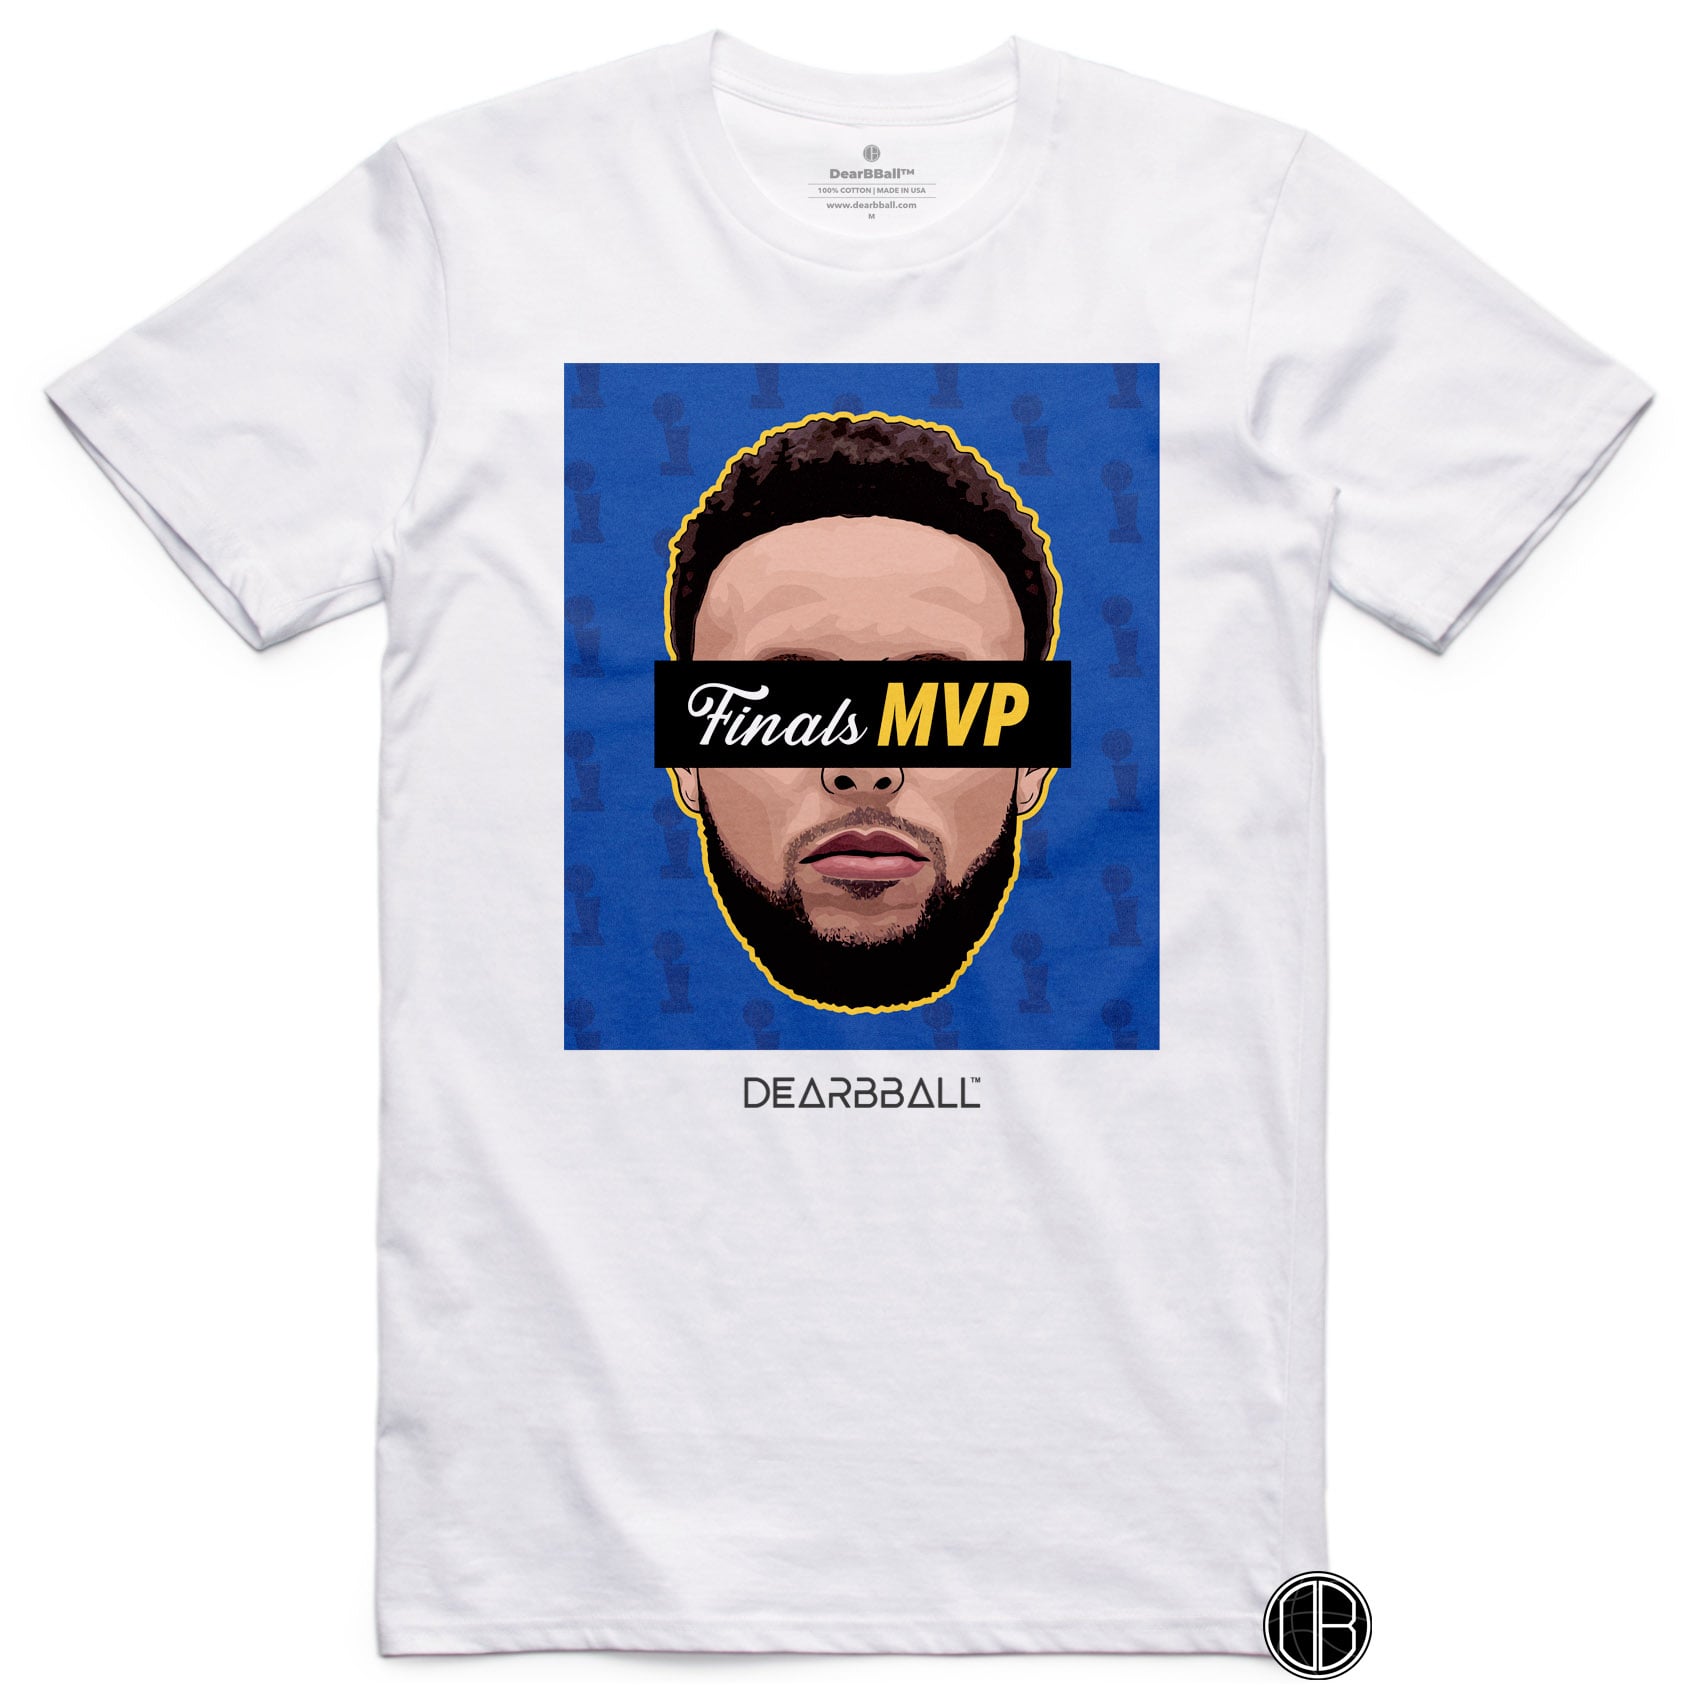 Child-T-Shirt-Stephen-Curry-Warriors-Golden-State-Dearbball-clothes-brand-france